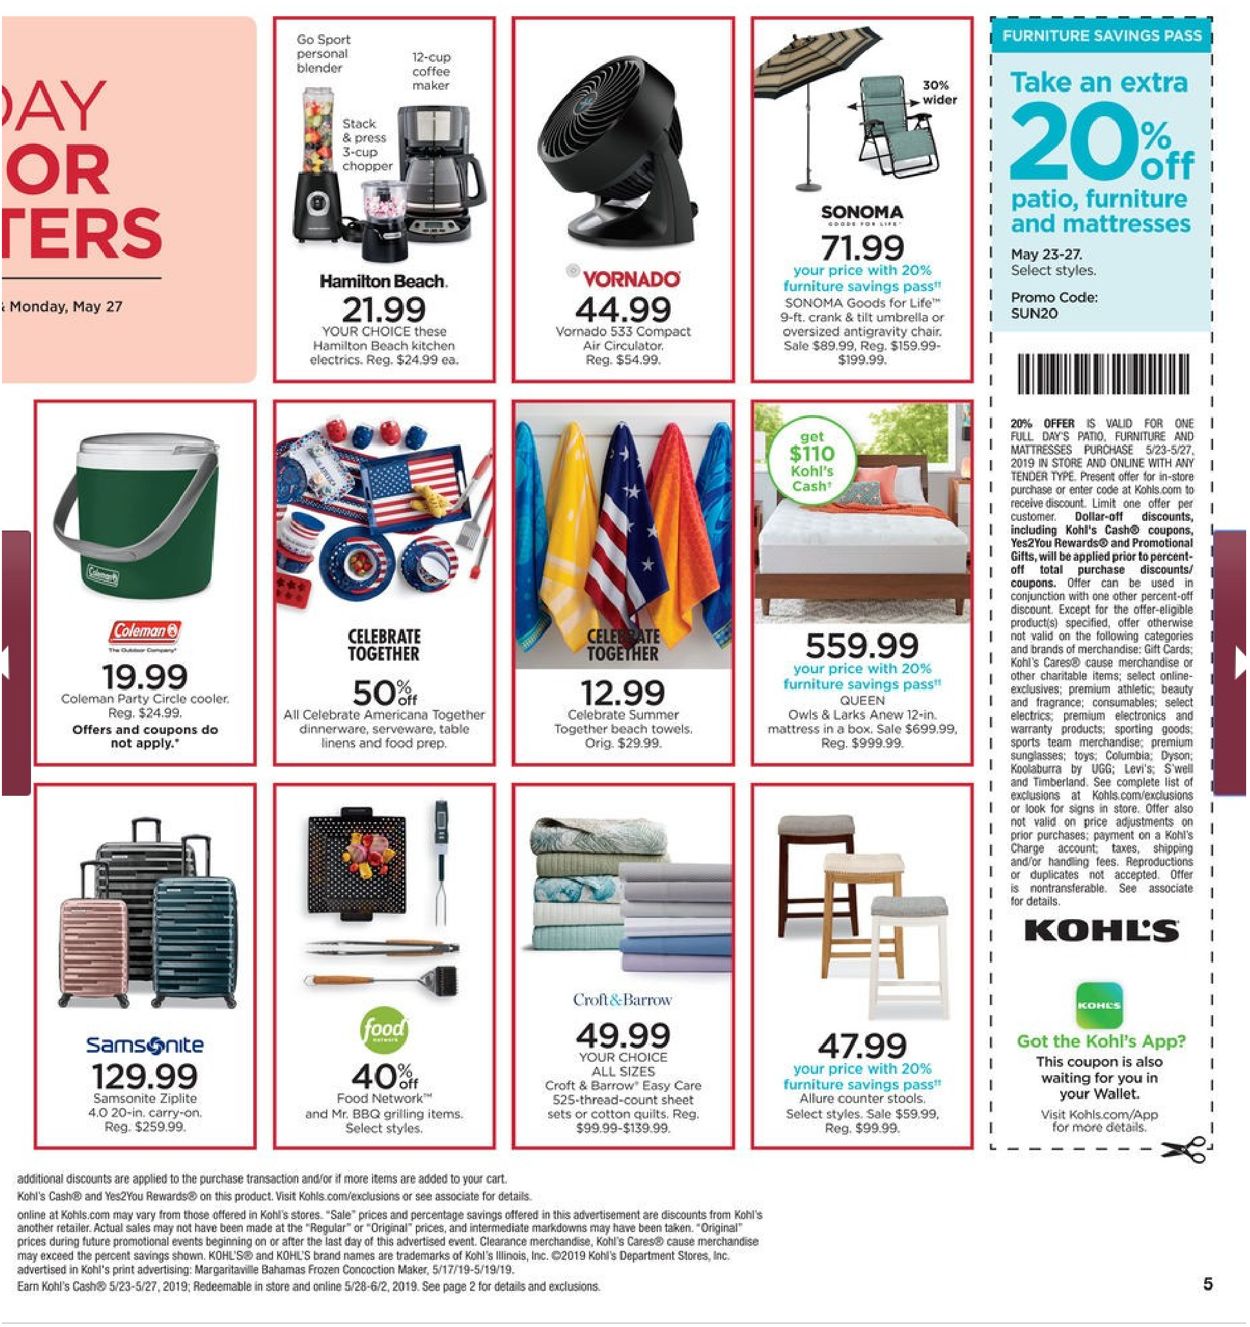 Kohl's Current weekly ad 05/23 - 05/27/2019 [5] - frequent-ads.com